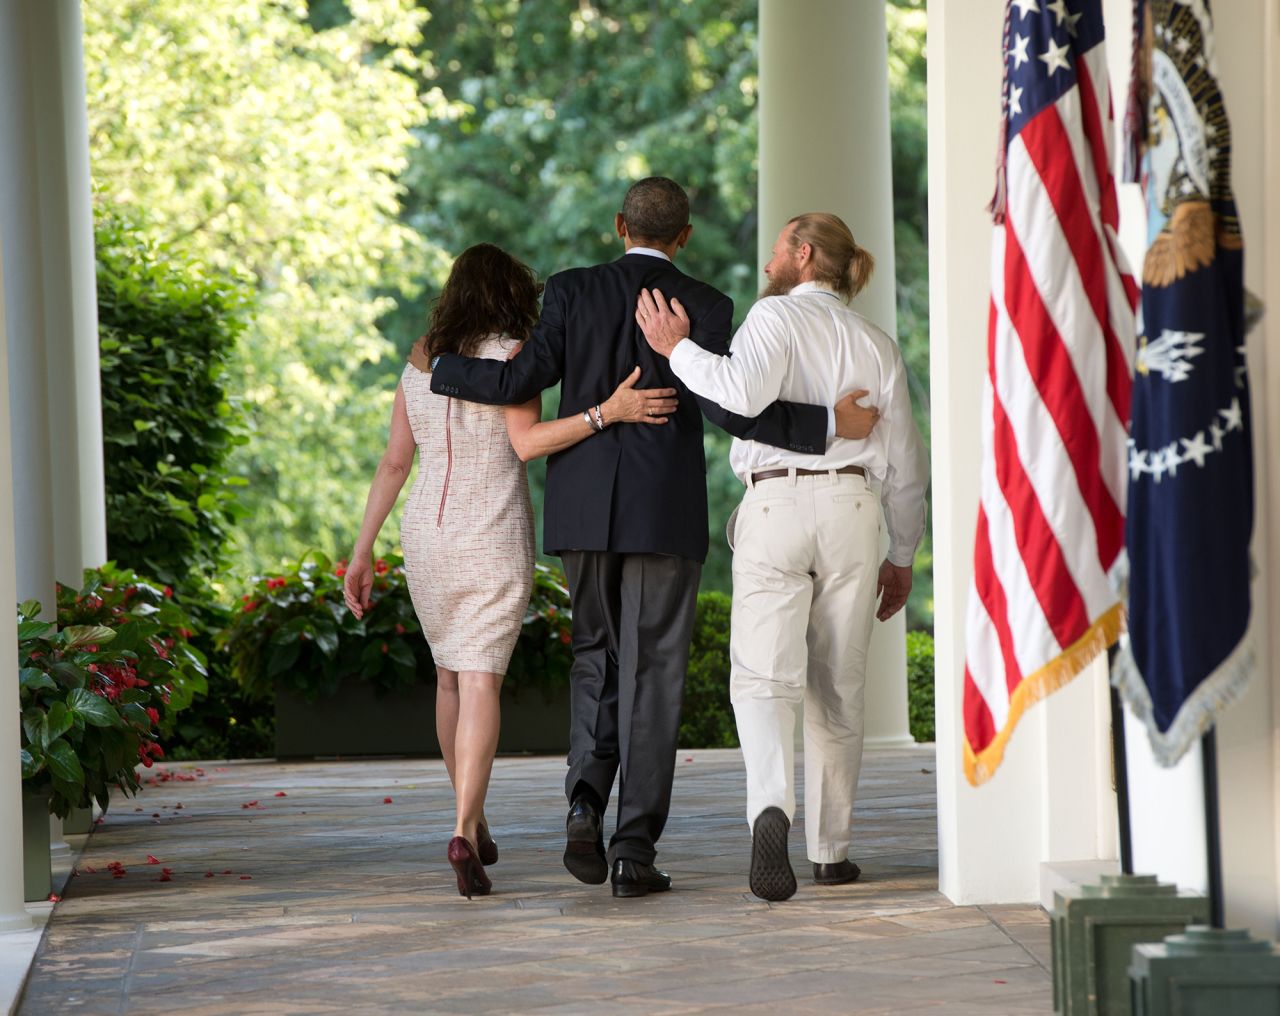 US President Barack Obama walks with the parents of Army Sgt. Bowe Bergdahl after making a statement at the White House about <a href="http://www.cnn.com/2014/05/31/world/asia/afghanistan-bergdahl-release/index.html" target="_blank">Bergdahl's release</a> in May 2014. Bergdahl had been held captive in Afghanistan for nearly five years, and the Taliban released him in exchange for five U.S.-held prisoners.